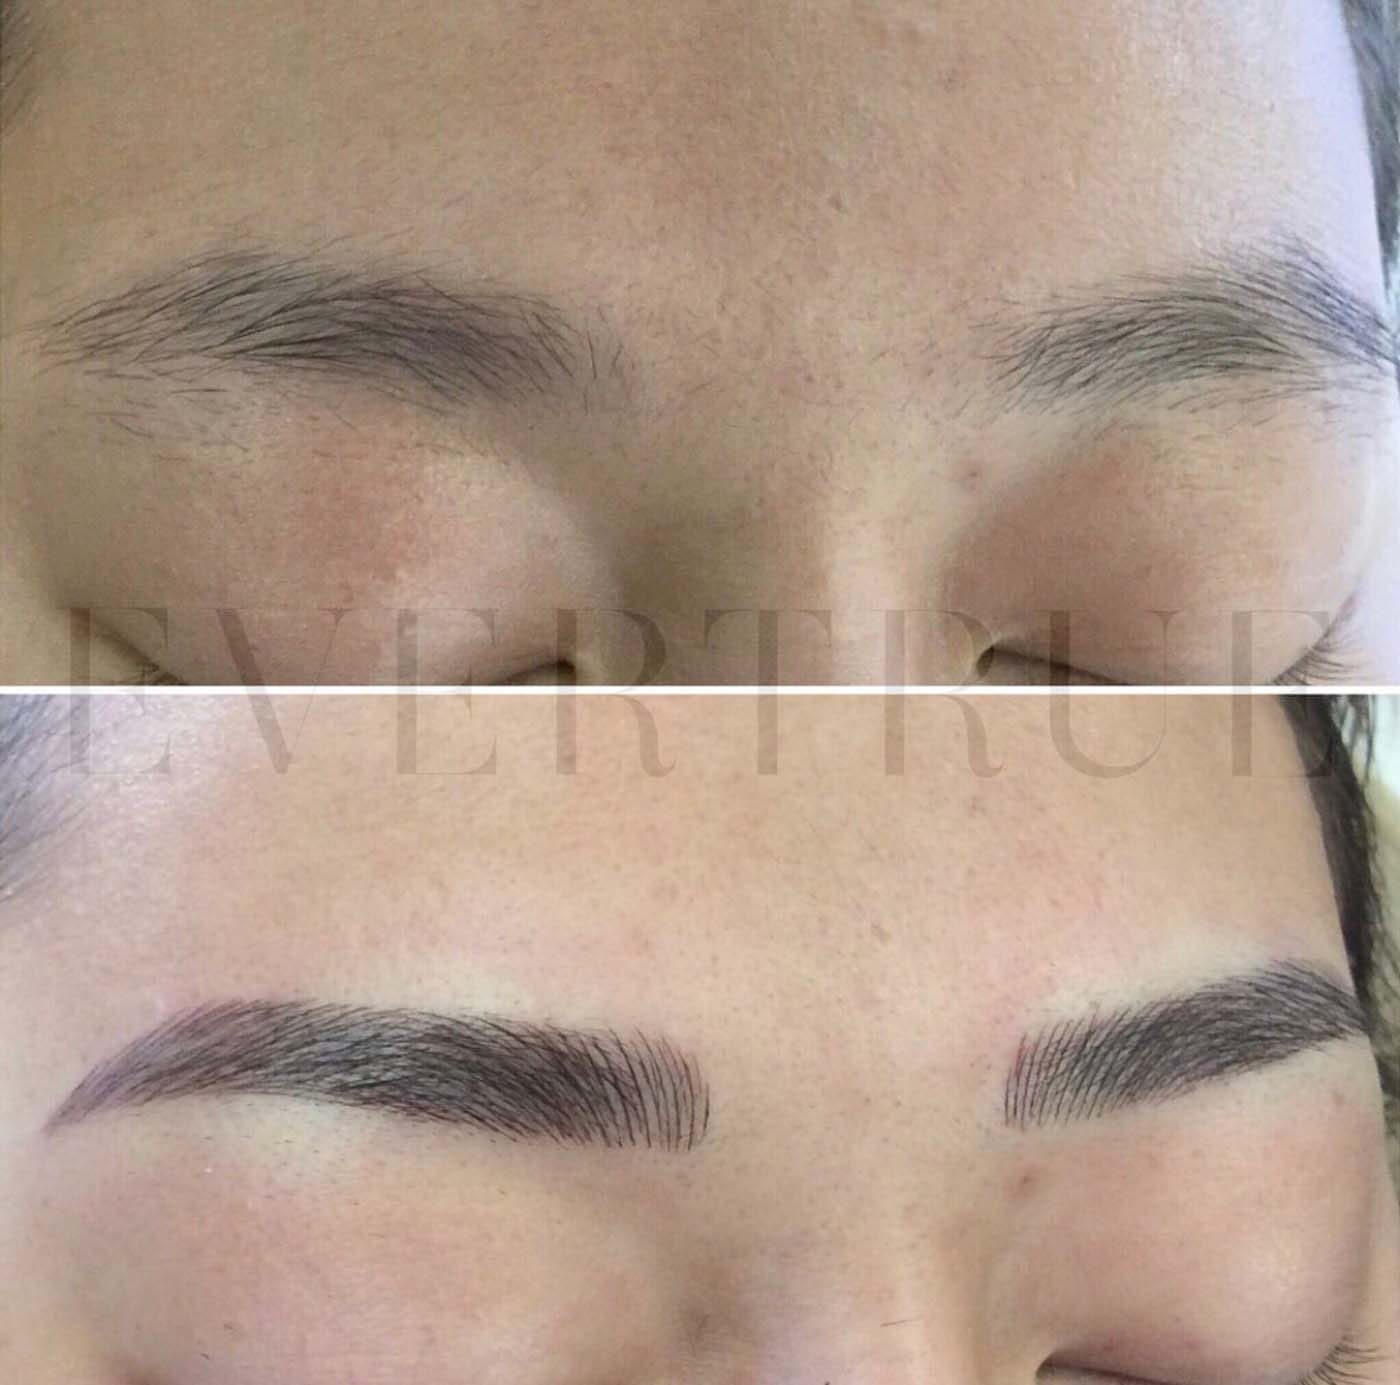 PROCESS. For its Microblading treatments, EverTrue Salon uses sterilized, cosmetic-grade, FDA-approved pigments. All their tools are single-use and discarded after treatment. Photo by Ramon Padilla 